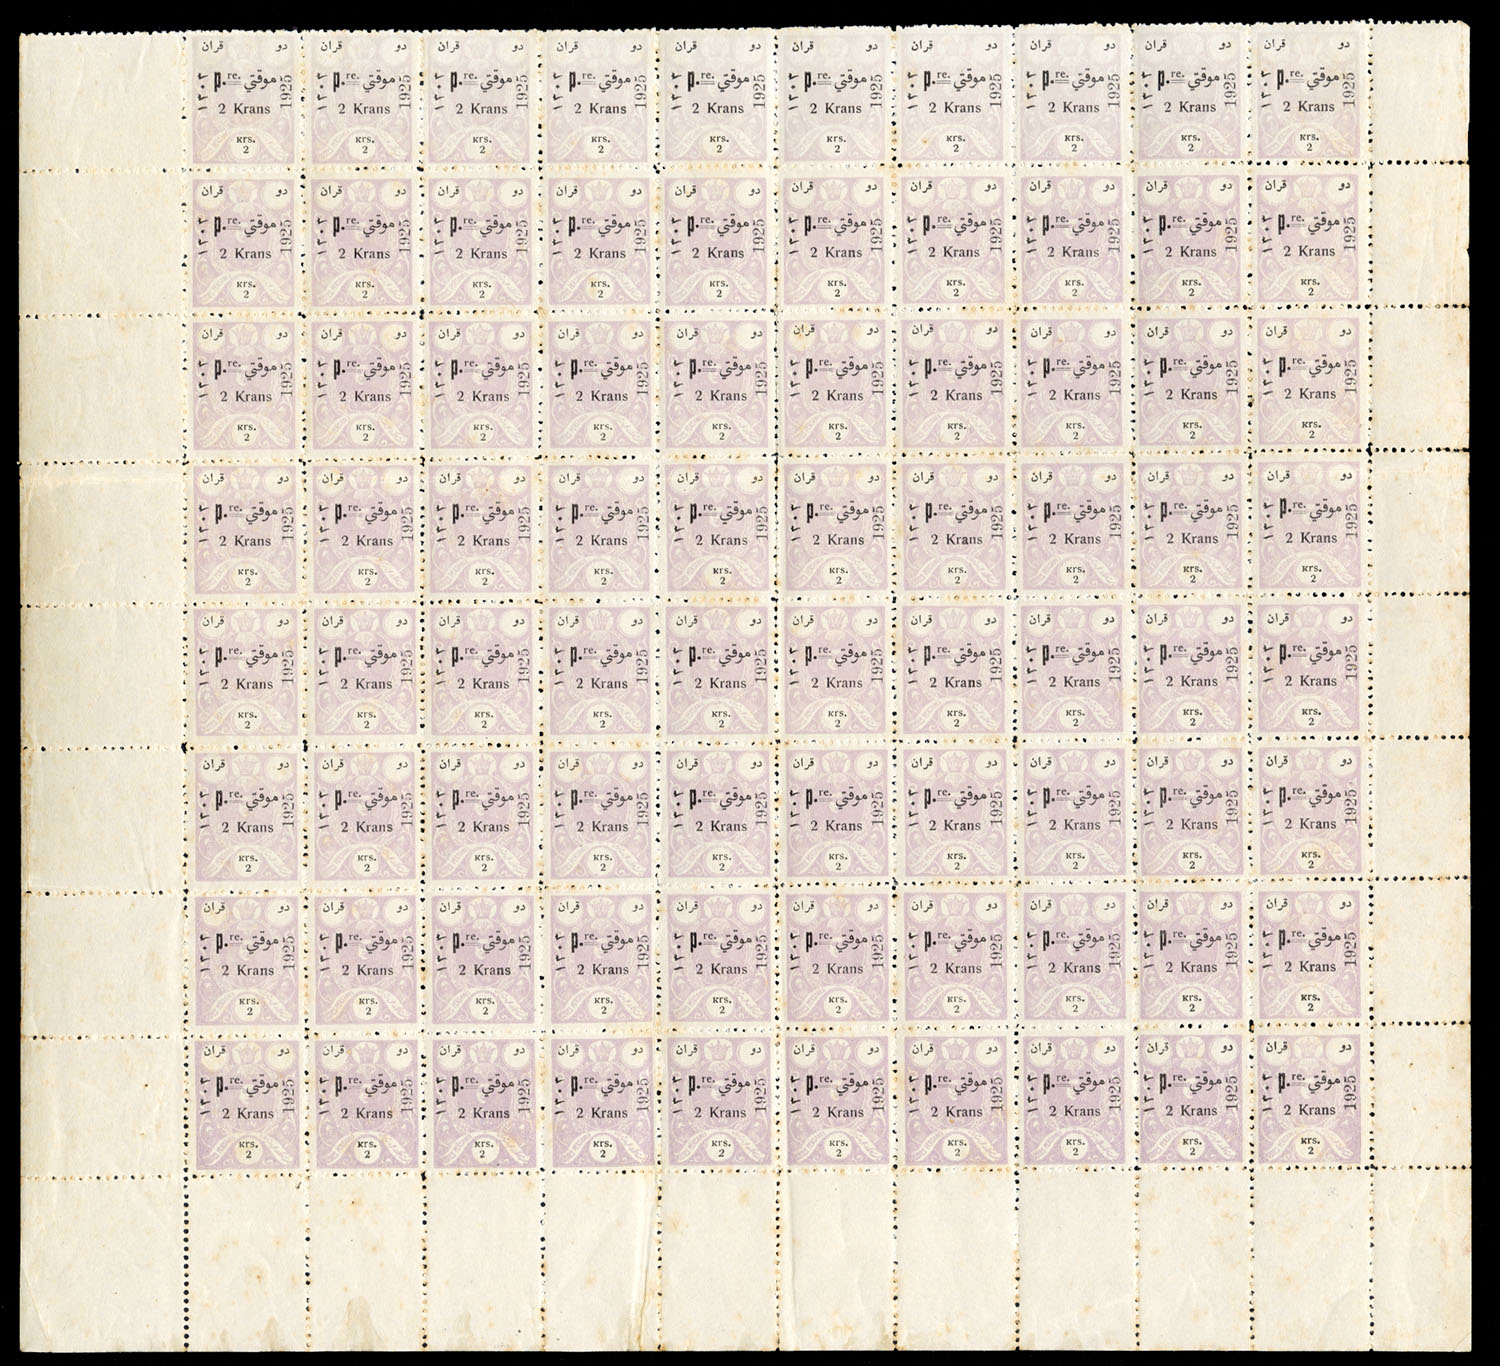 Lot 971 - MONTENEGRO Issued under Italian Occupation  -  Cherrystone Auctions U.S. & Worldwide Stamps & Postal History